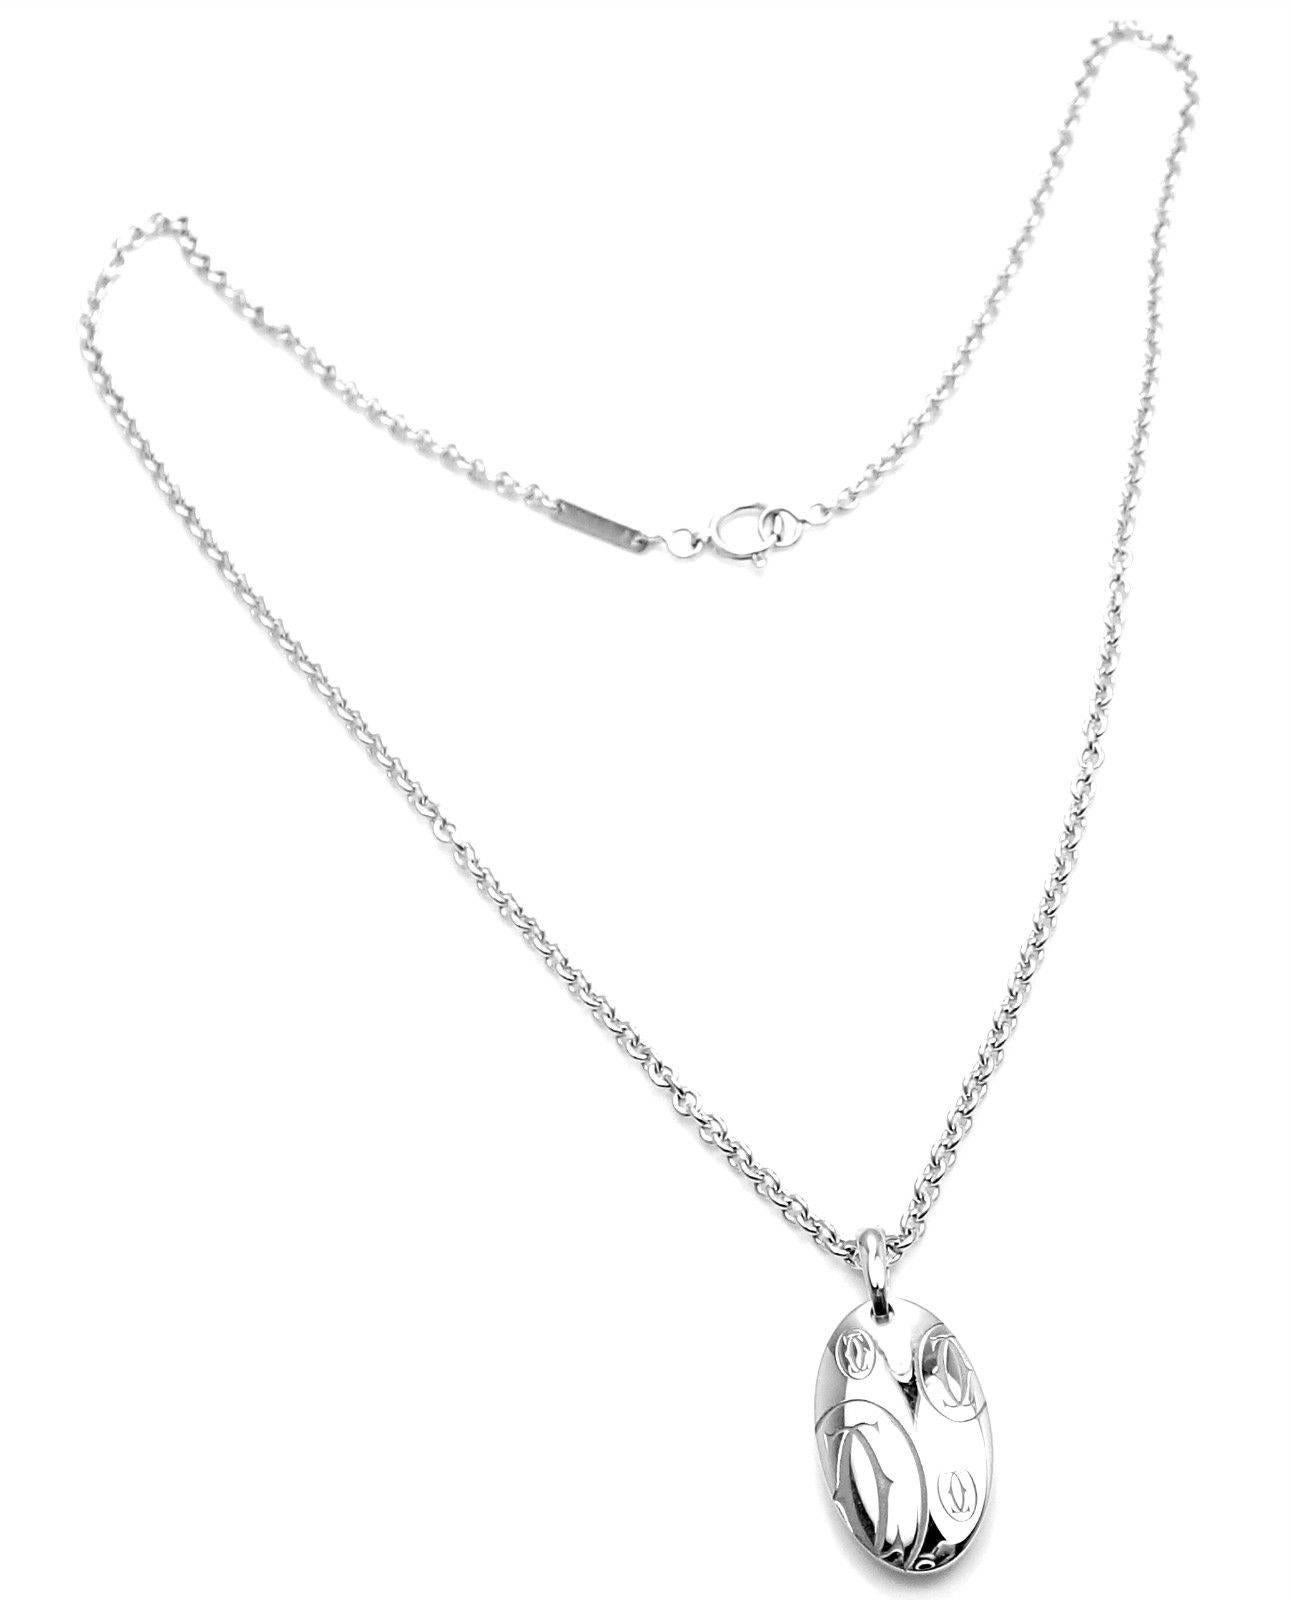 18k White Gold Happy Birthday Charm Pendant Necklace by Cartier. 
This pendant comes with Cartier certificate.
Details: 
Measurements: Length: Chain 16.25